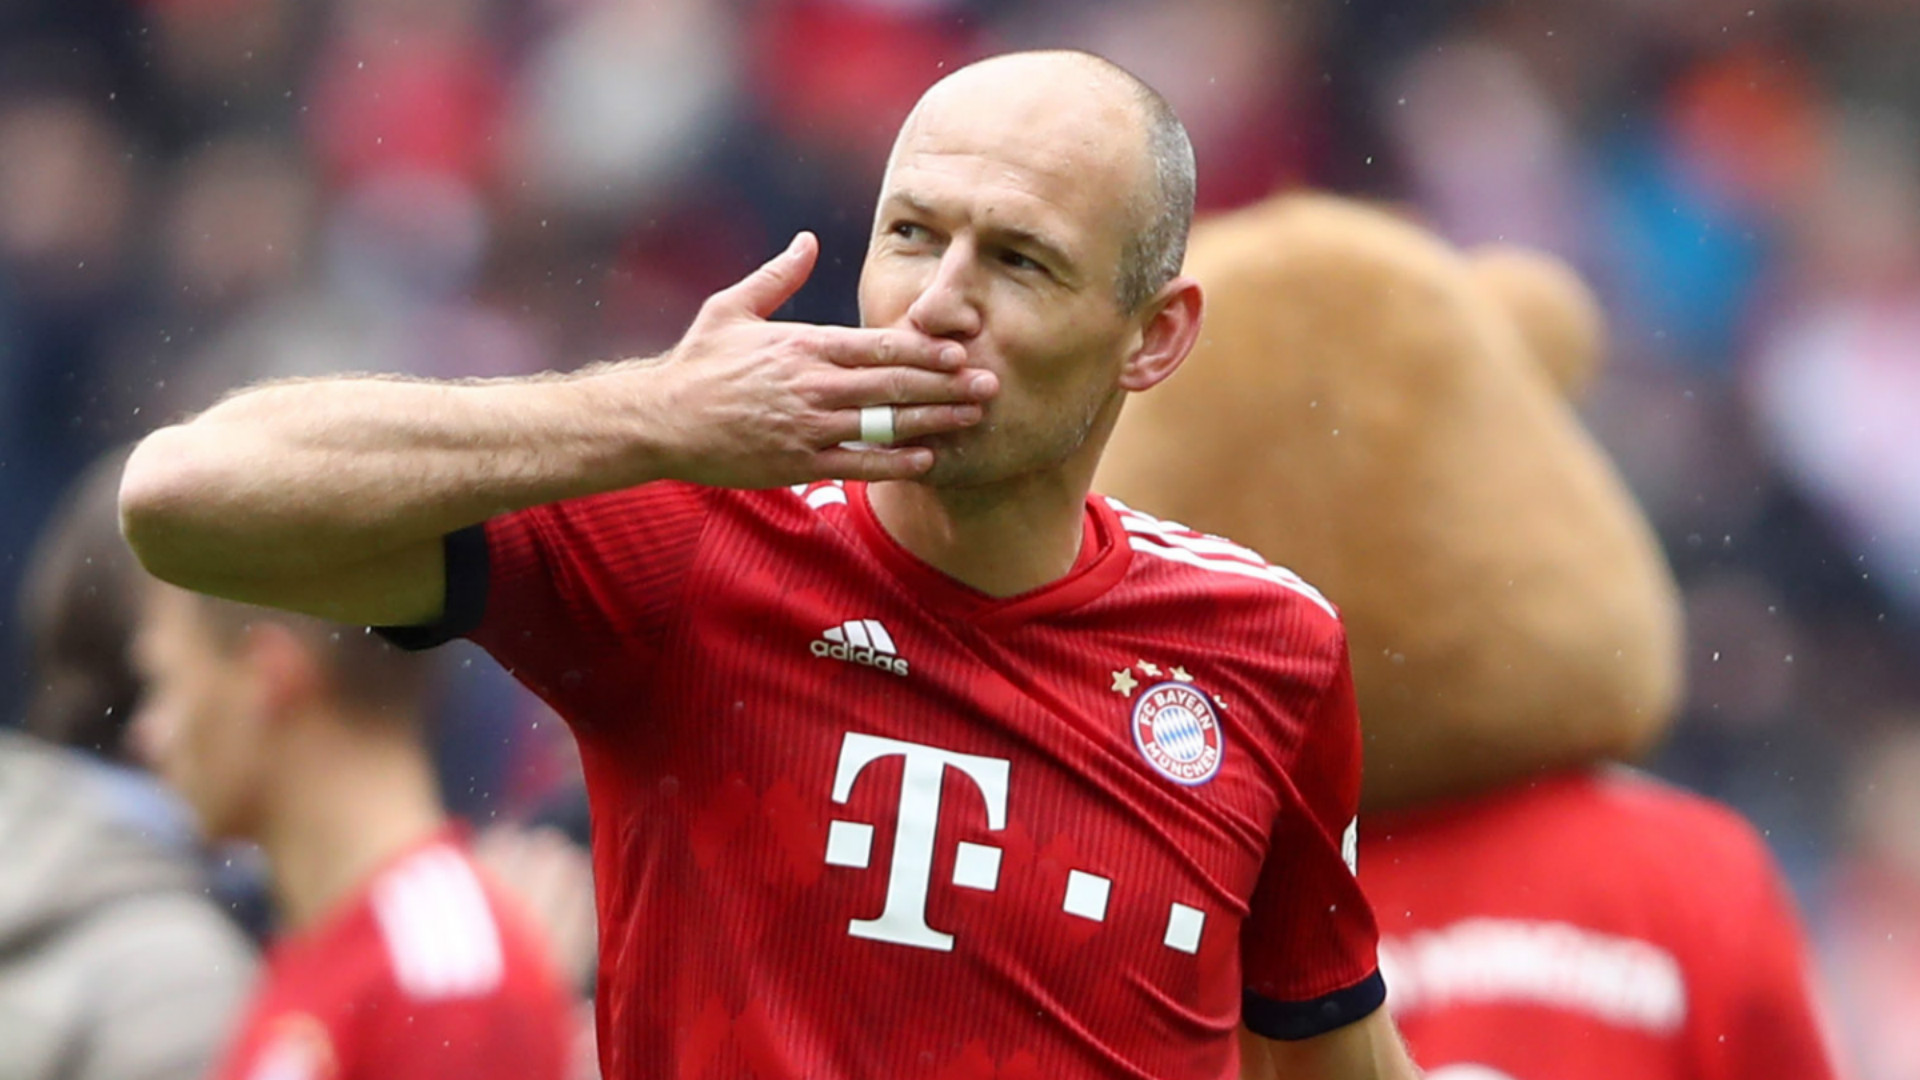 'Robben just didn't make mistakes' - Dutch winger's skill and Pro Evolution Soccer ability, admired by Vonlanthen